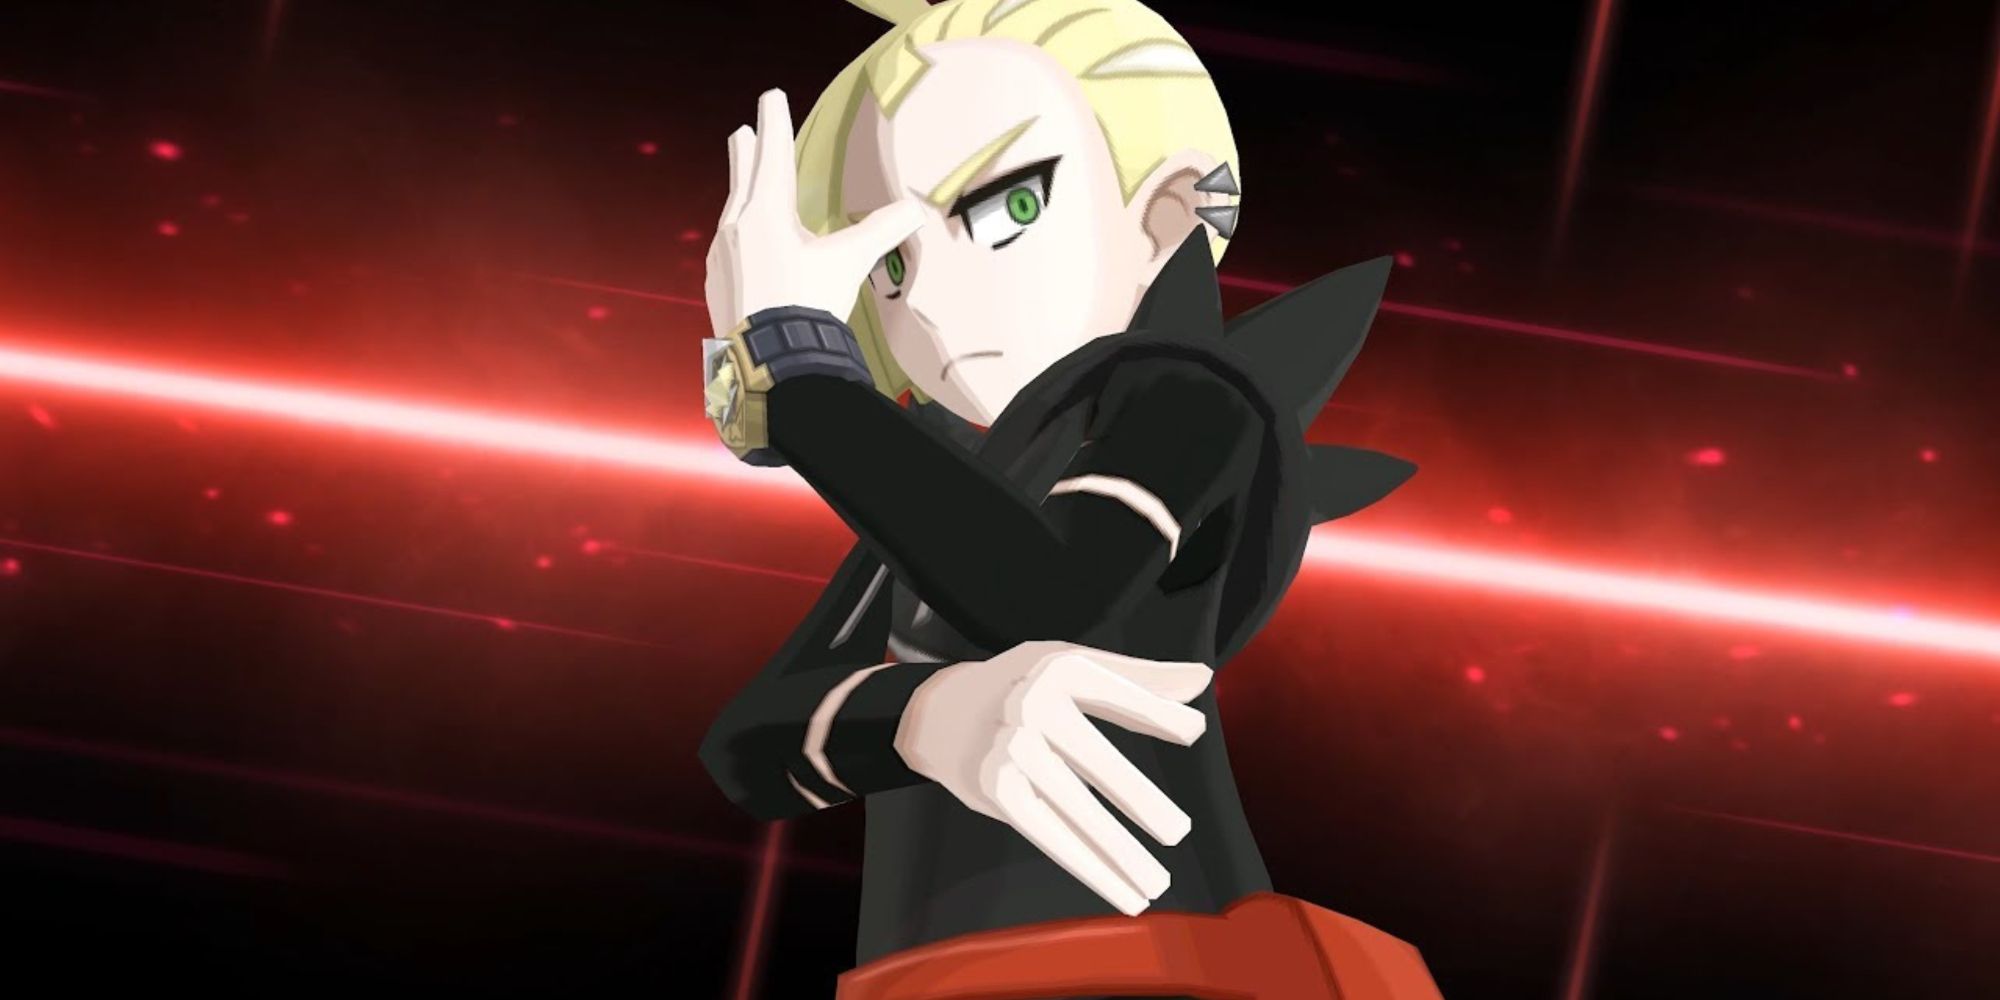 Pokemon Rival Gladion poses before a fight